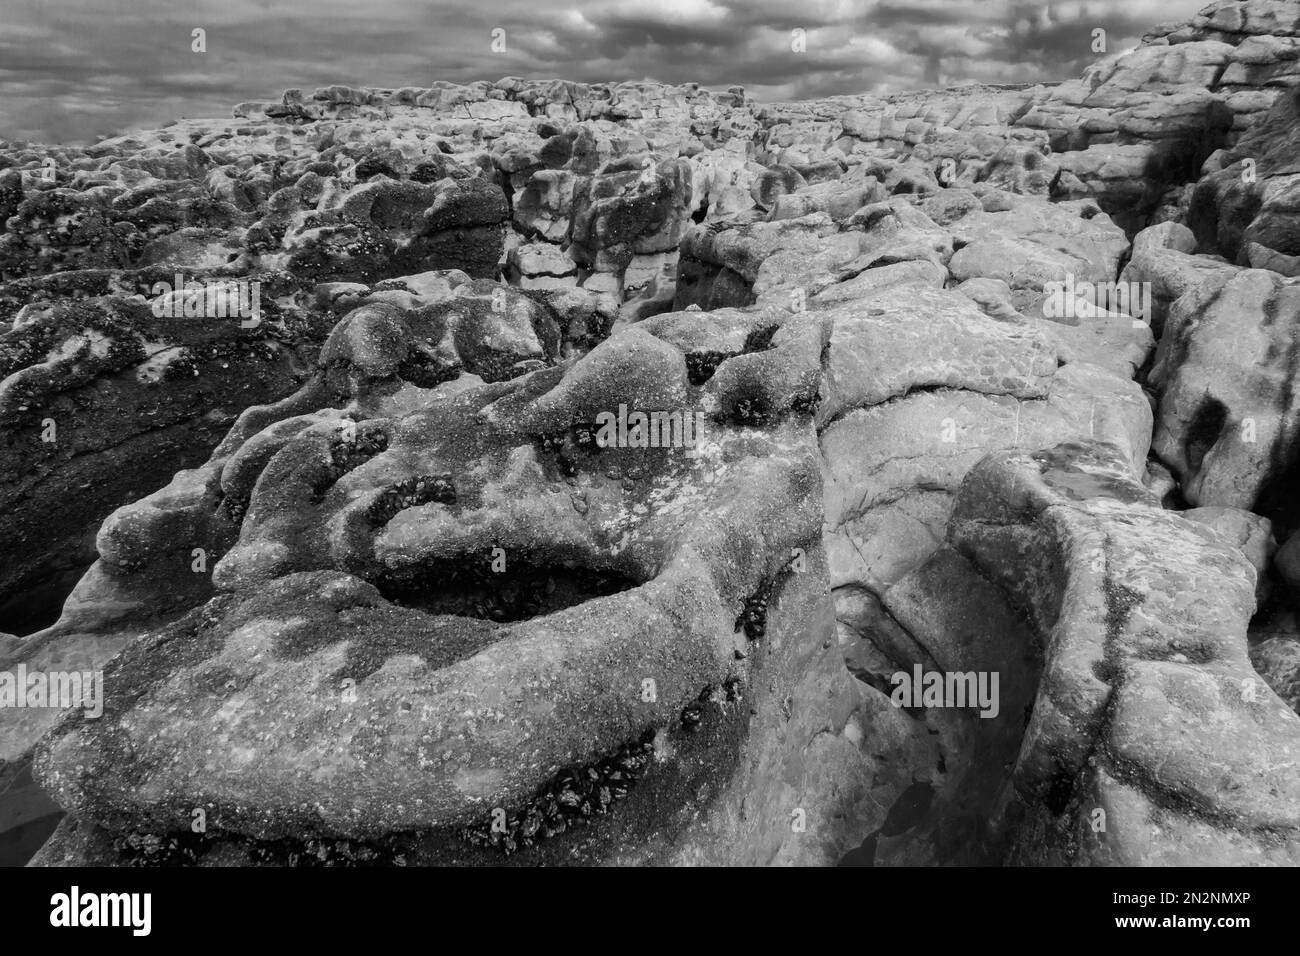 Interesting rock formations dating from the carboniferous period, Ogmore by Sea Glamorgan Wales UK. April 2022 Stock Photo